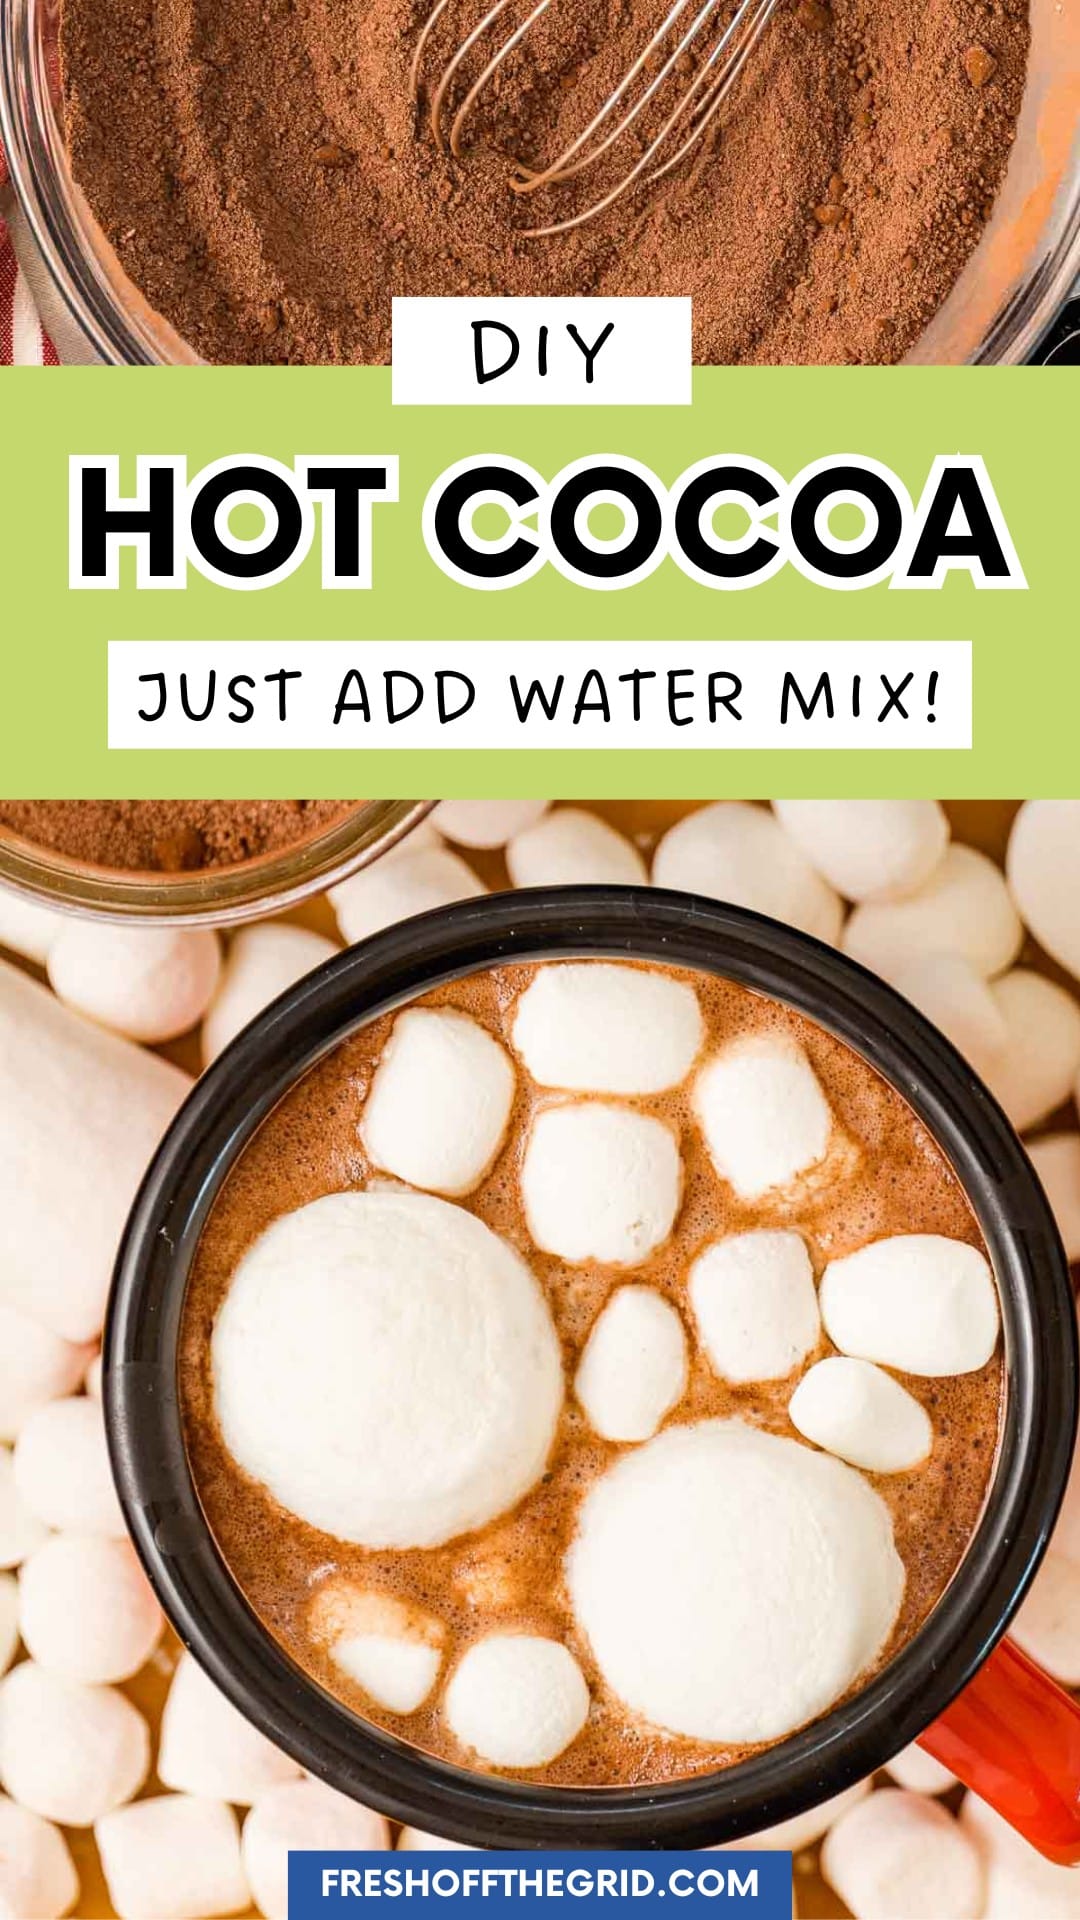 Pinterest image with text overlay reading "diy hot cocoa just add water mix"